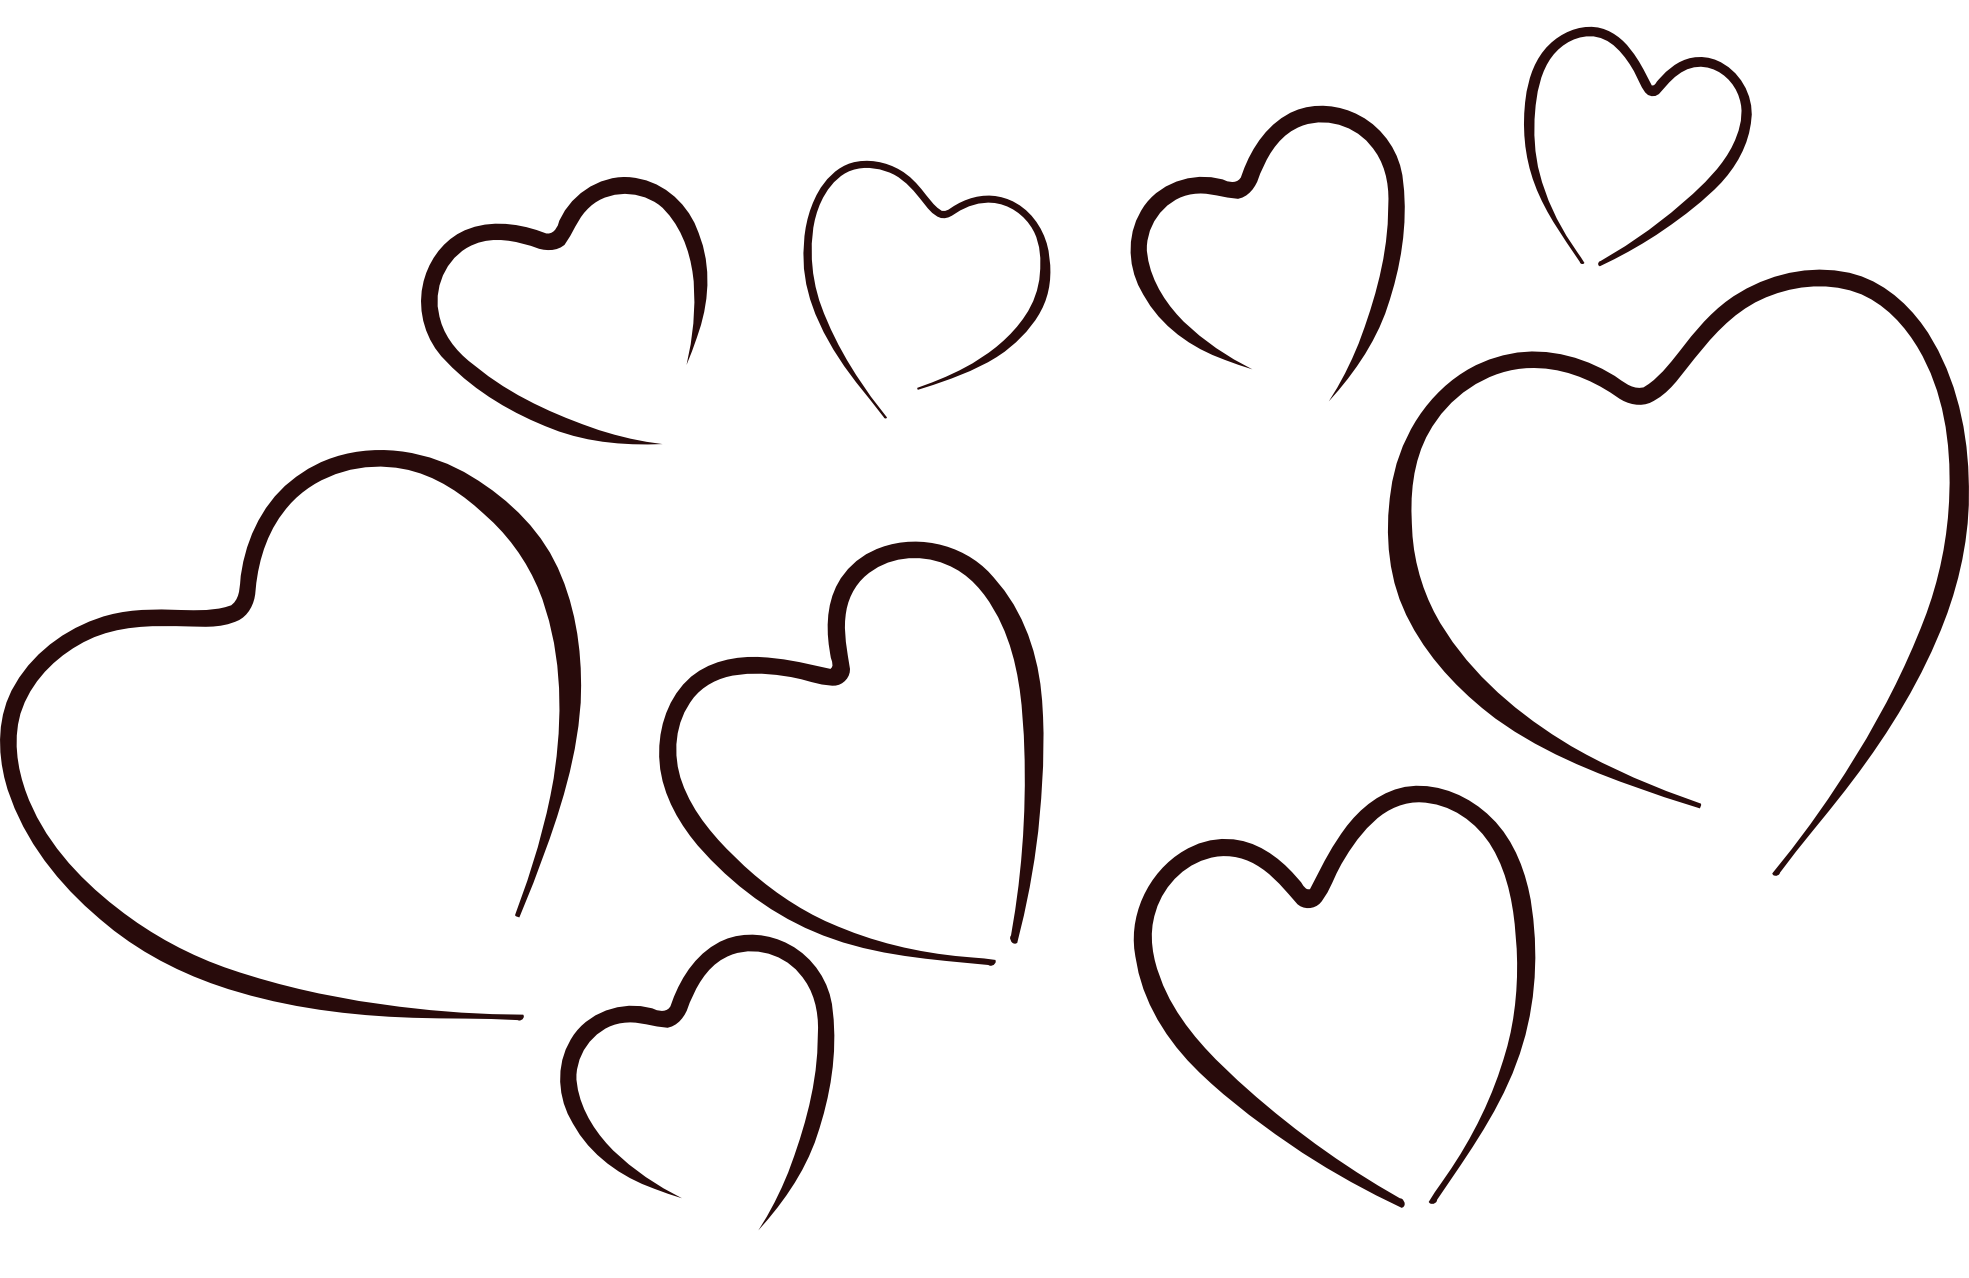 Black heart clipart png